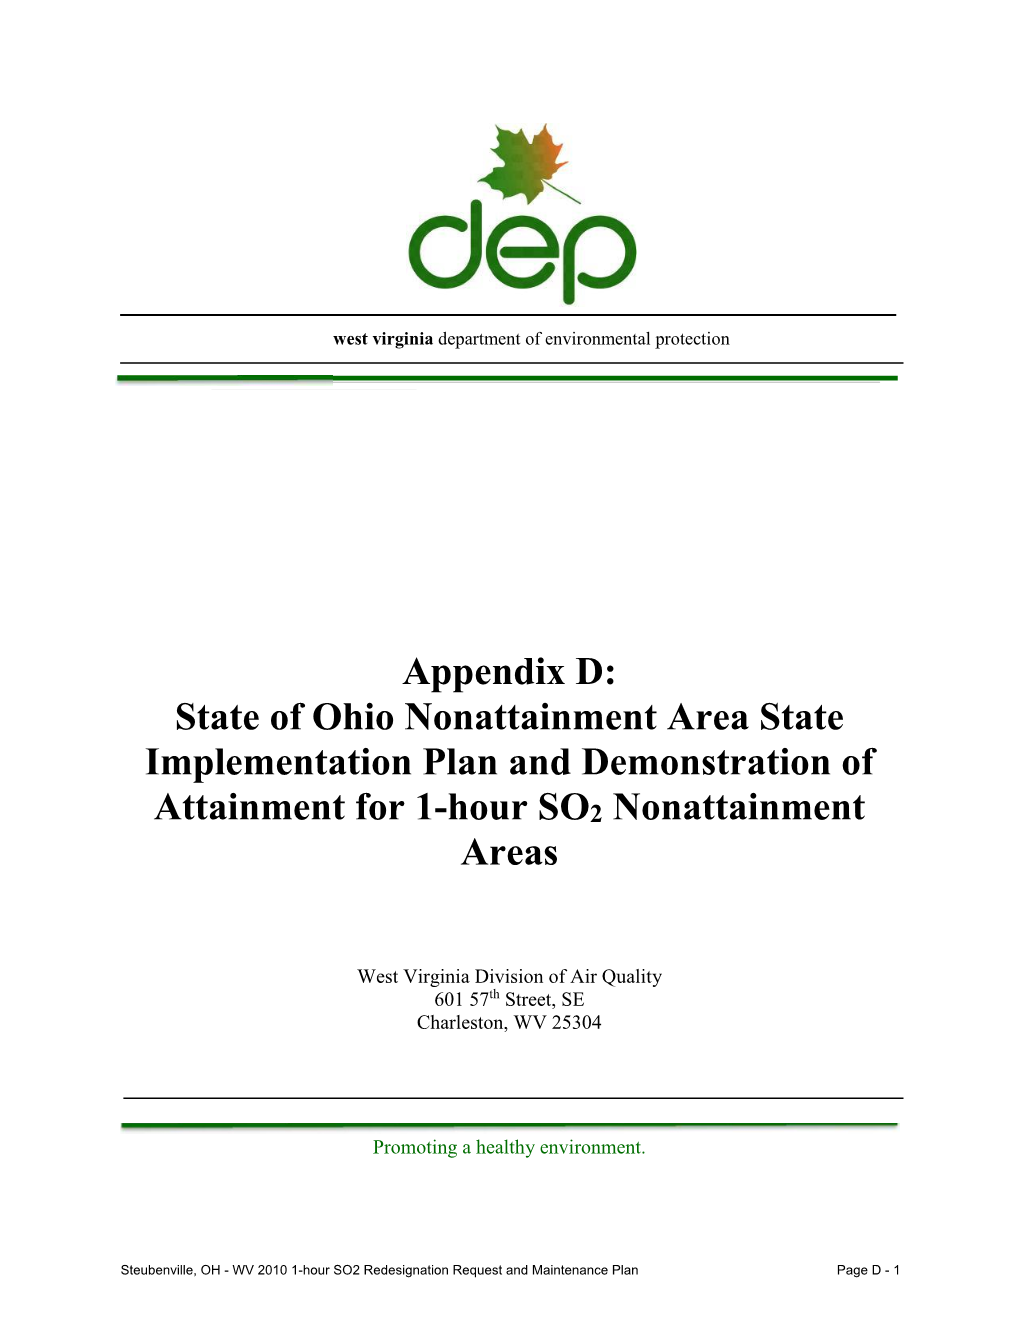 Appendix D: State of Ohio Nonattainment Area State Implementation Plan and Demonstration of Attainment for 1-Hour SO2 Nonattainment Areas